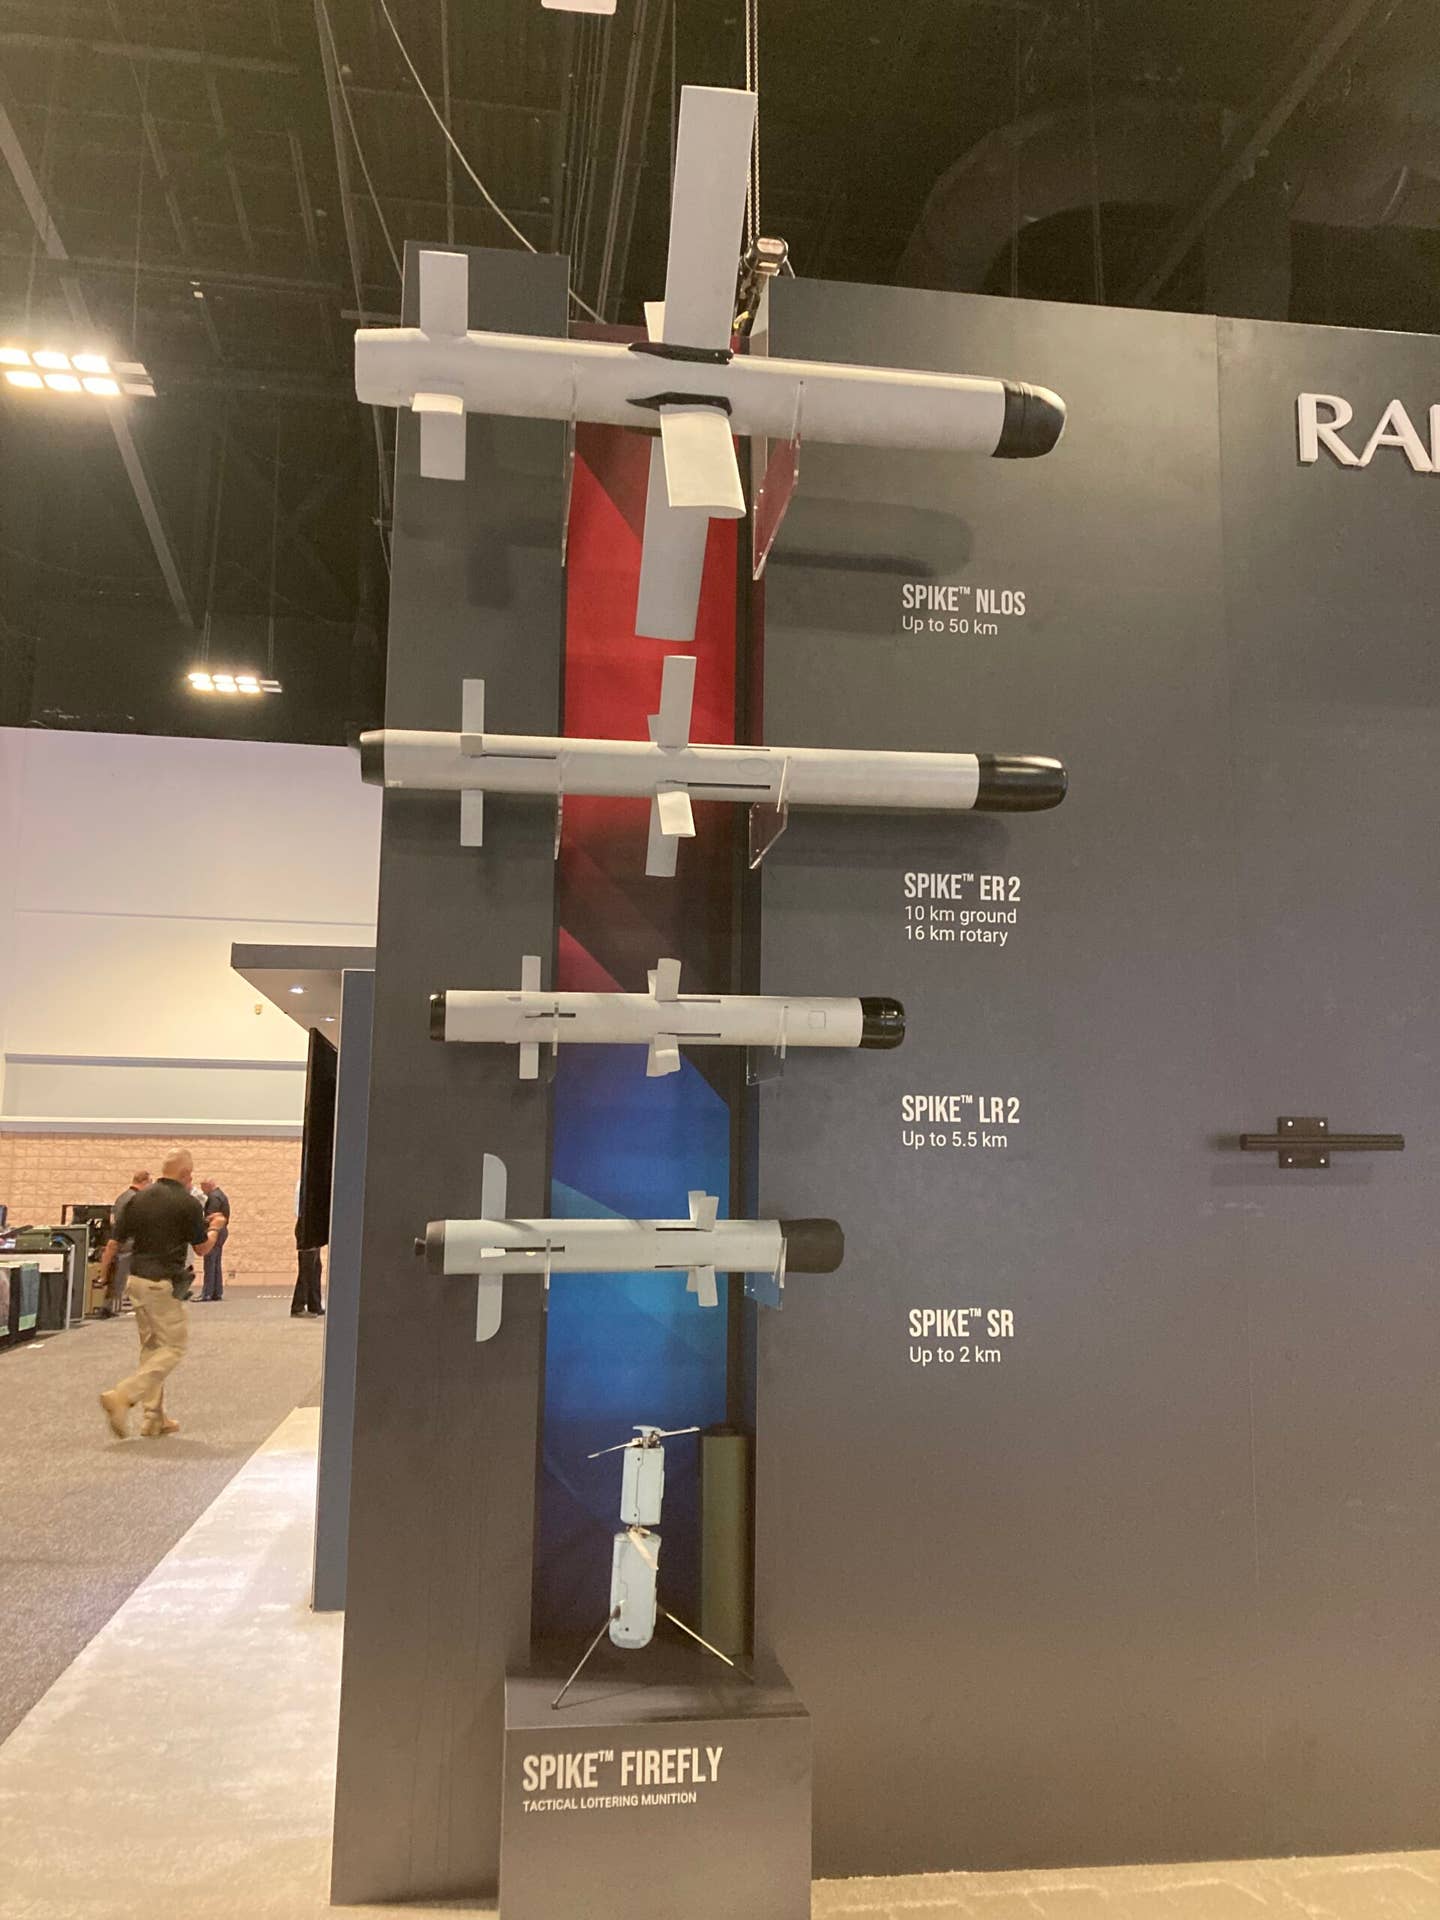 The Spike family of loitering munitions, made by Rafael Advanced Defense Systems, on display last week at SOFWeek in Tampa. (Howard Altman photo)